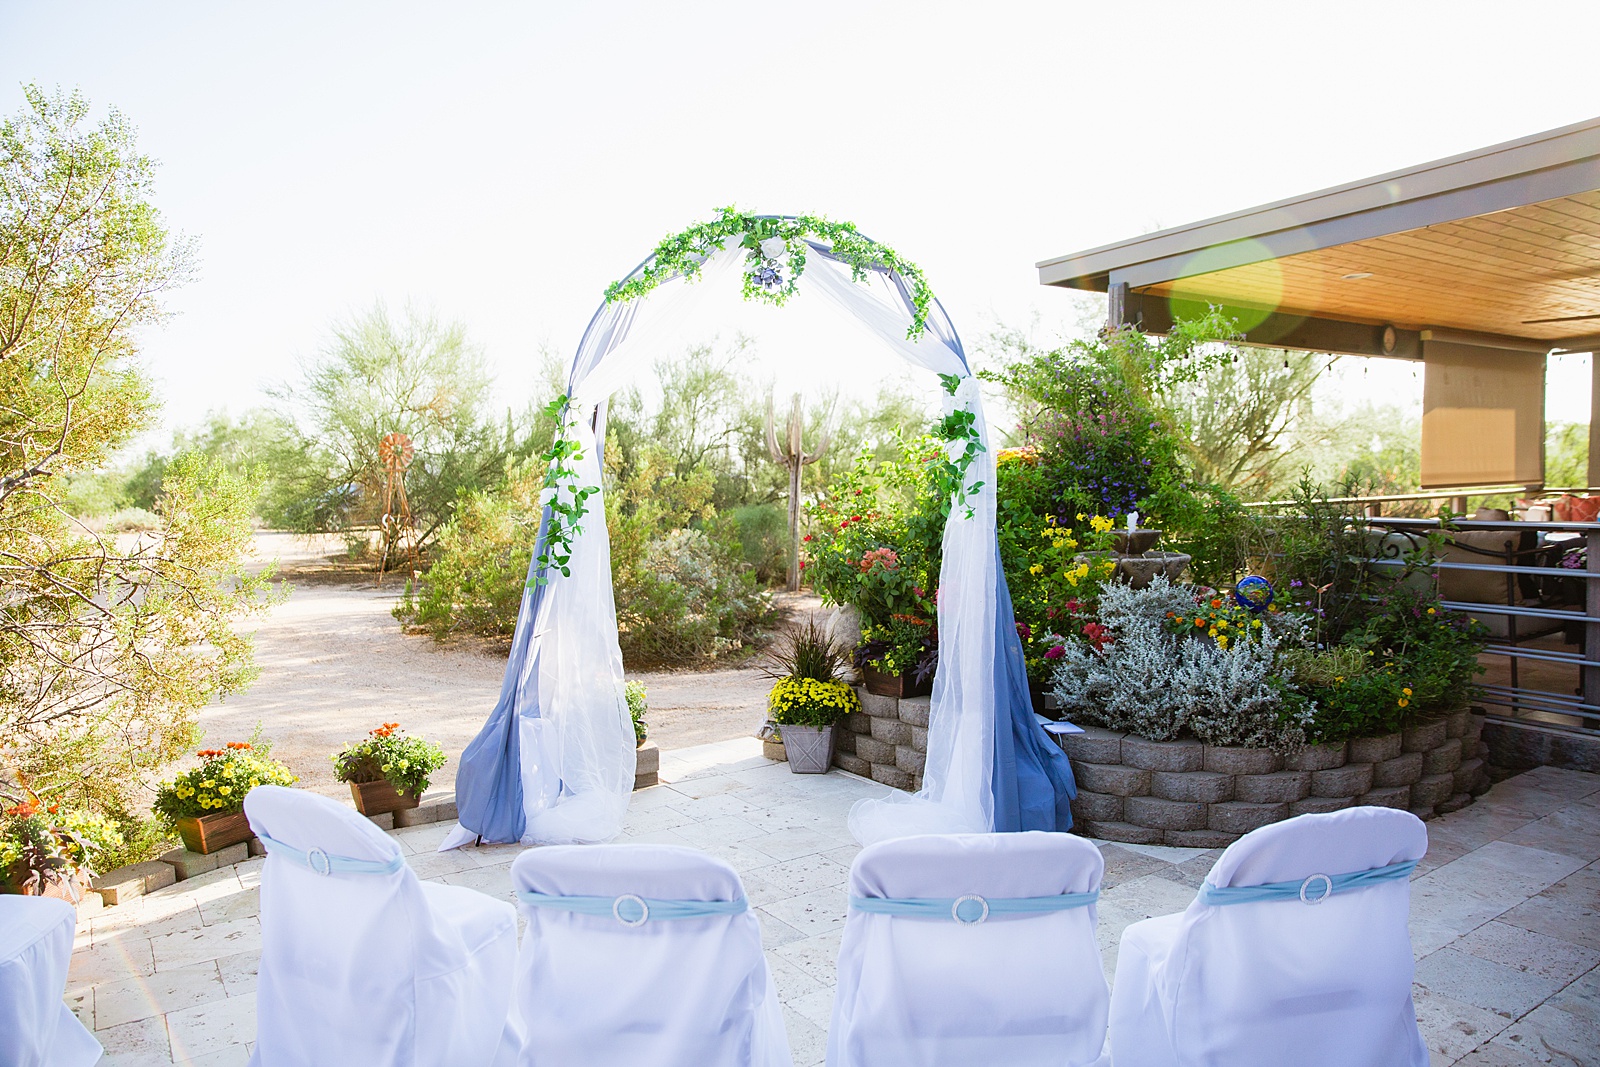 Simple garden ceremony set up for a backyard elopement in Scottsdale, Arizona by elopement photographers PMA Photography.